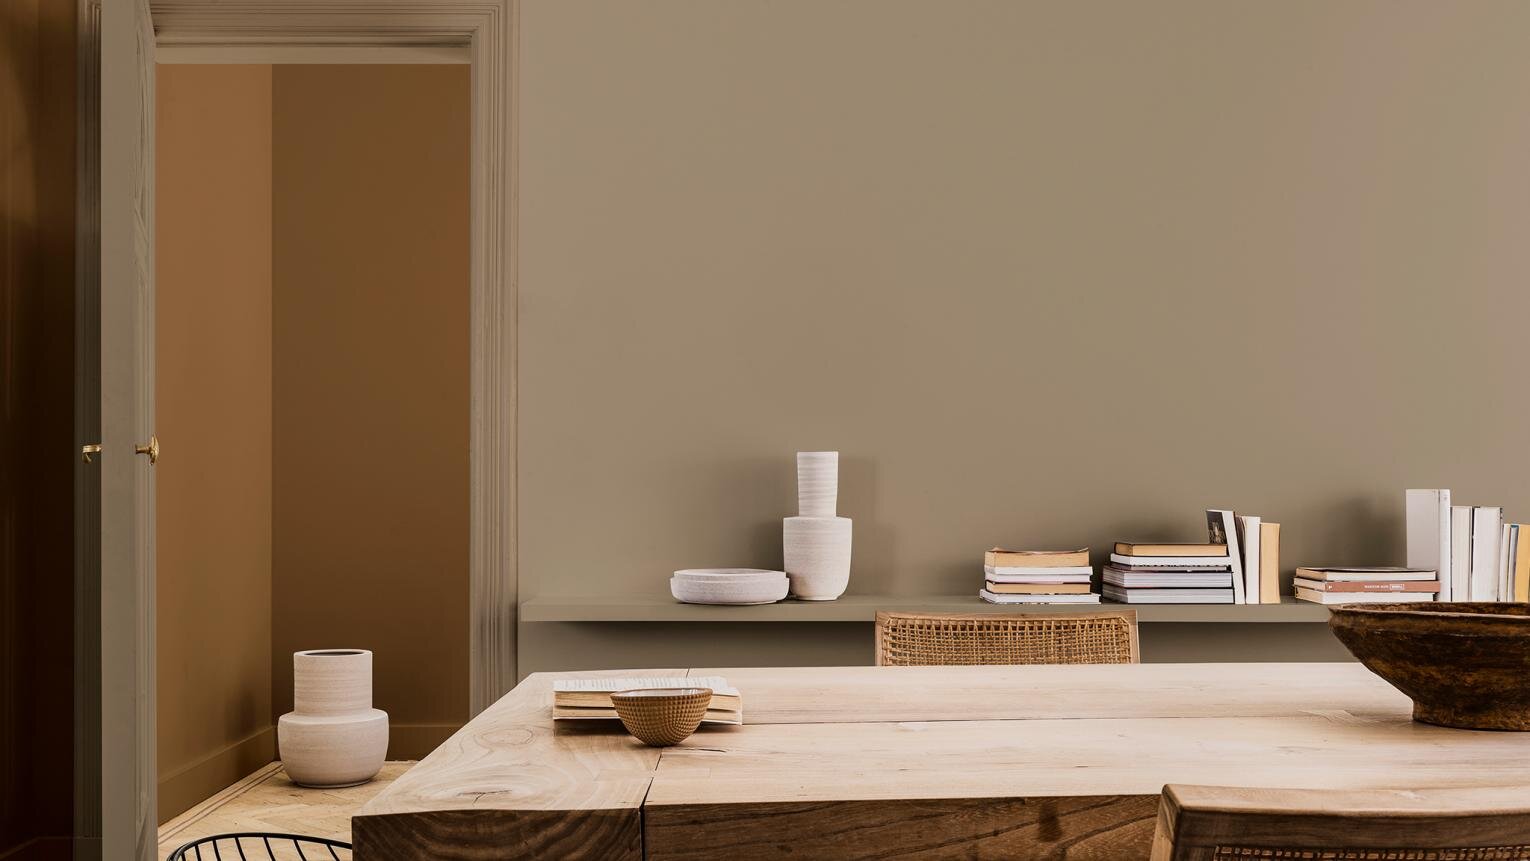 The Color Trends For 2021: Warm Comforting Hues And Bright Color Pops - The Nordroom